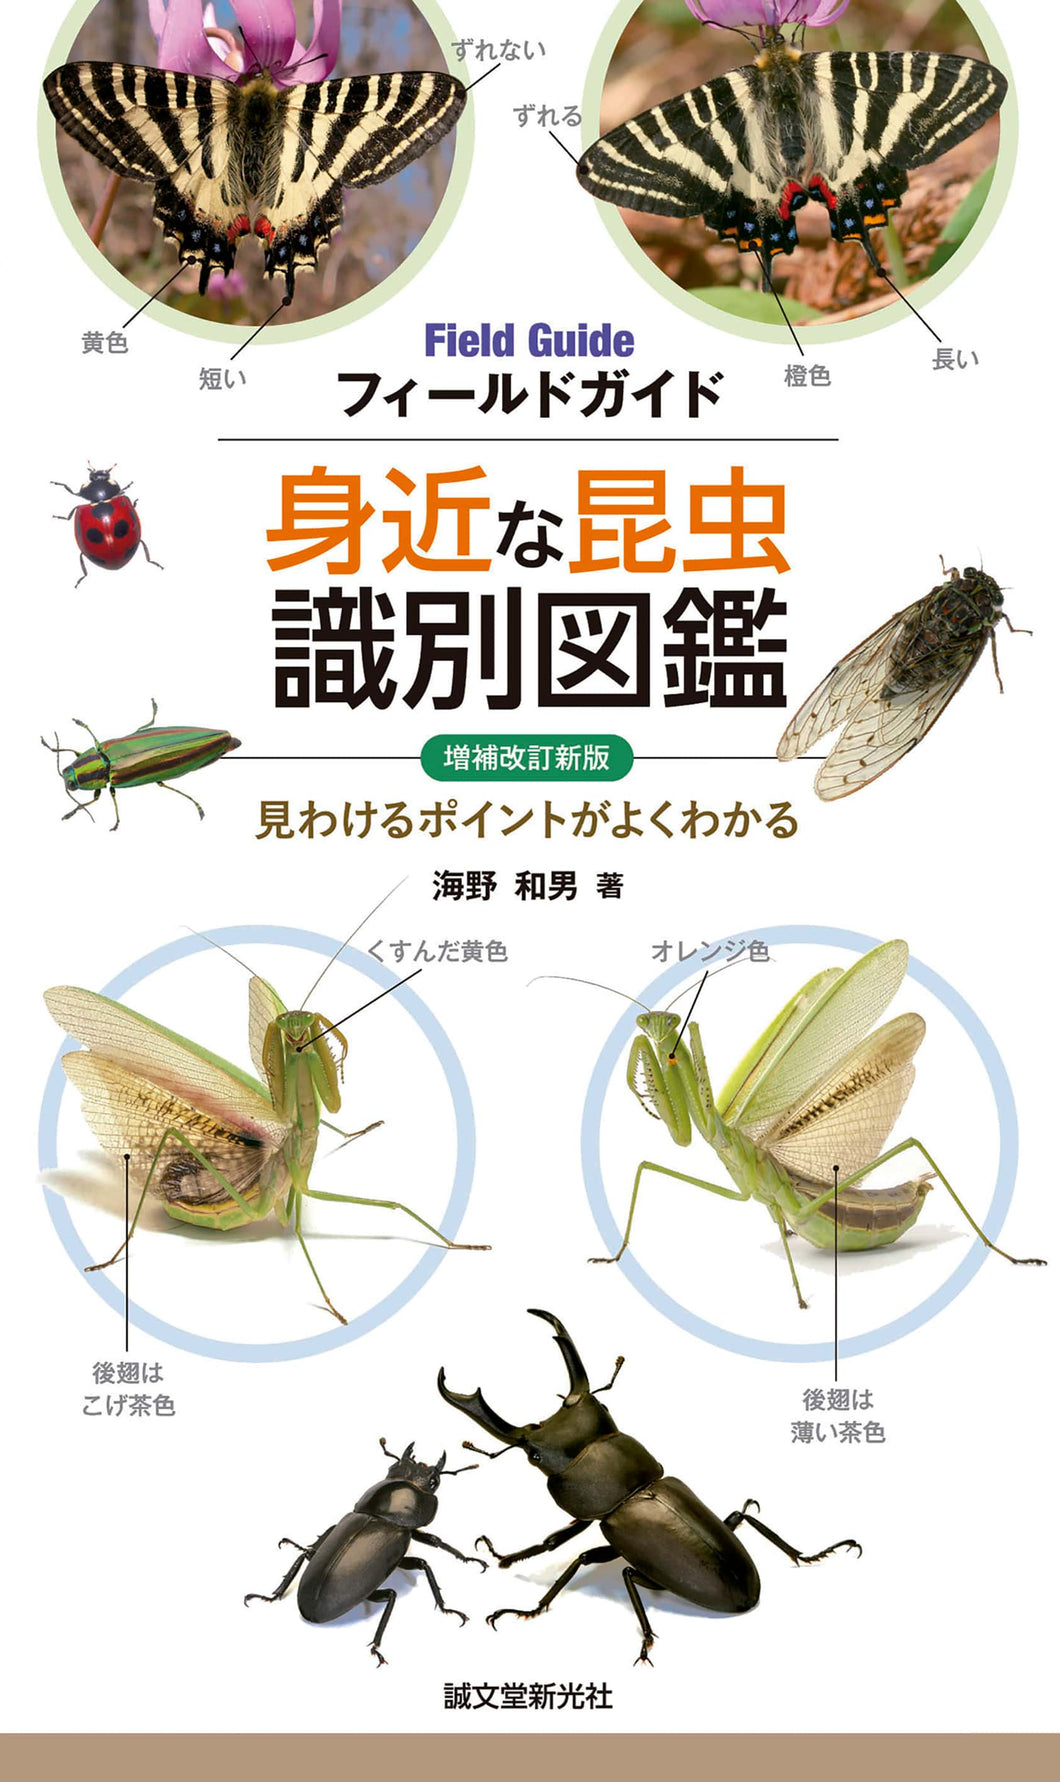 Enlarged and Revised New Edition Familiar Insect Identification Picture Book